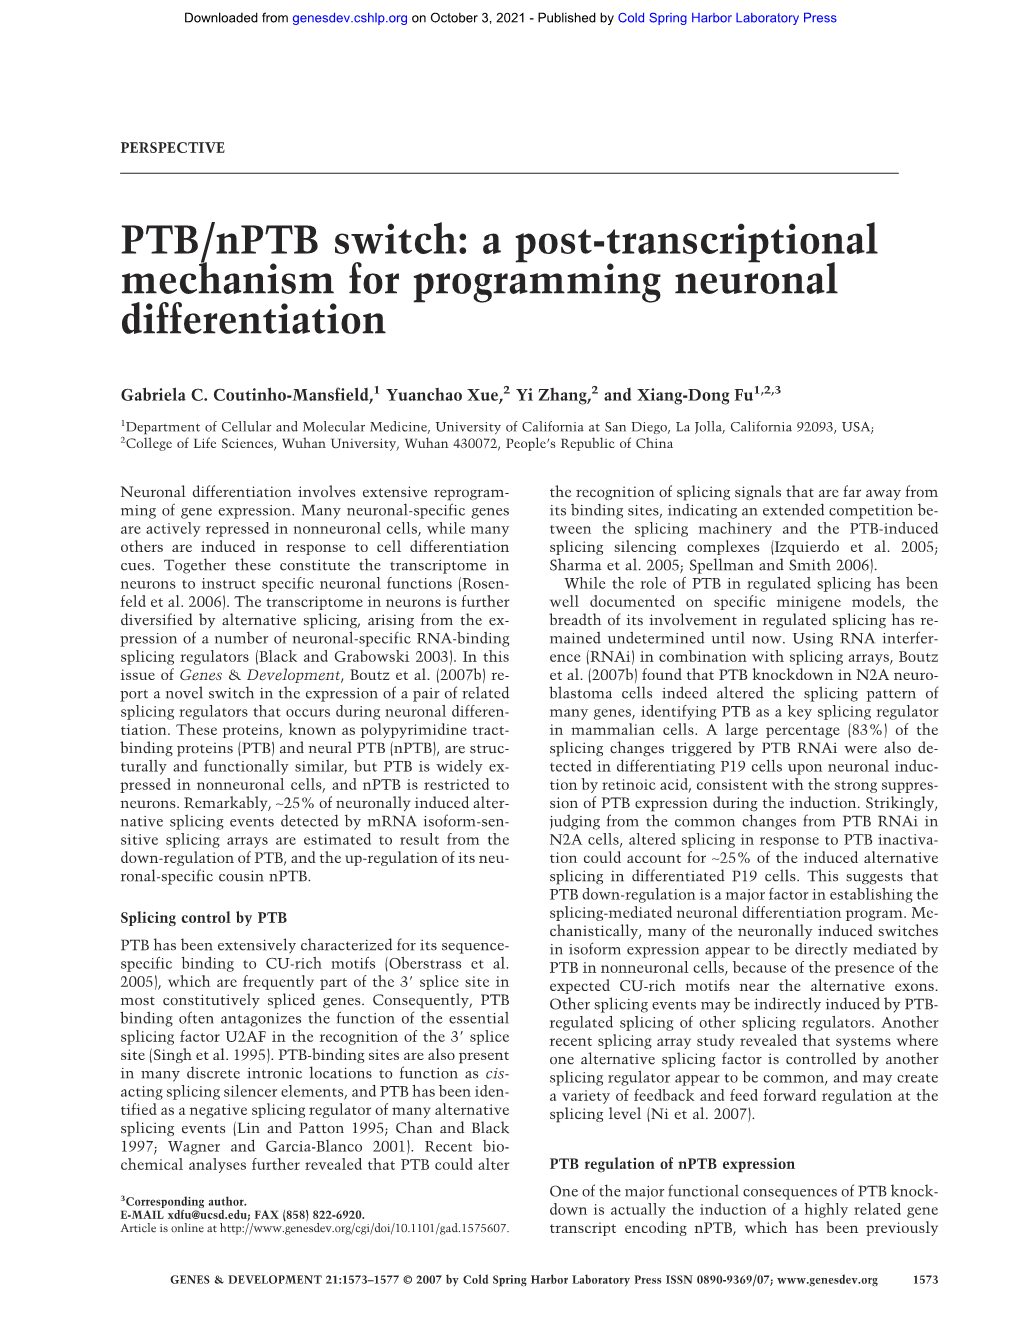 PTB/Nptb Switch: a Post-Transcriptional Mechanism for Programming Neuronal Differentiation